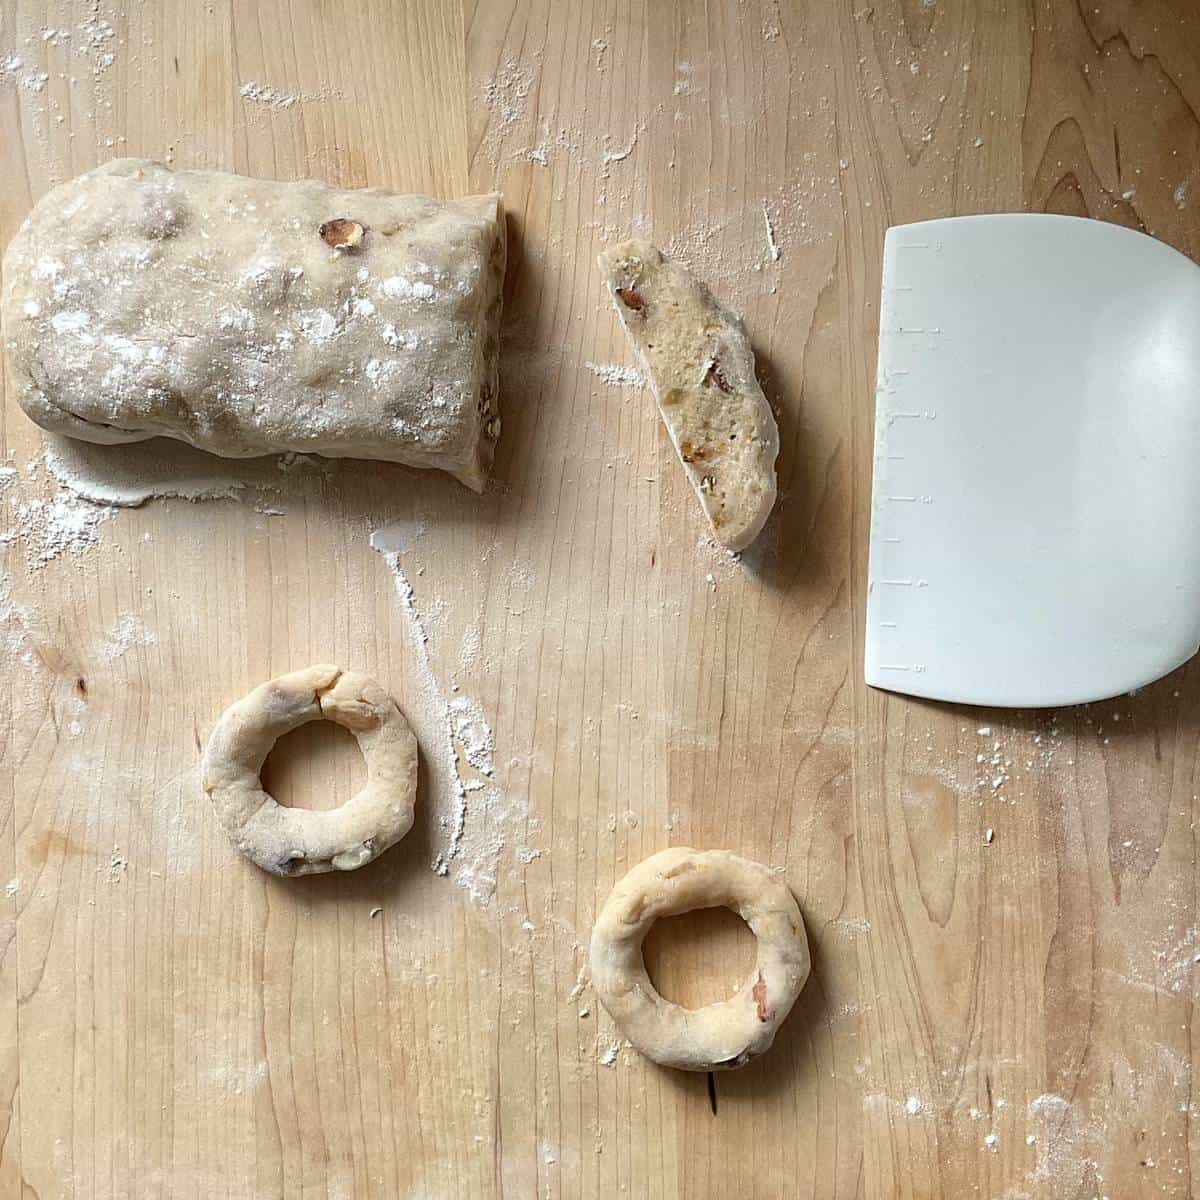 The cookie dough is shaped into a round shape.